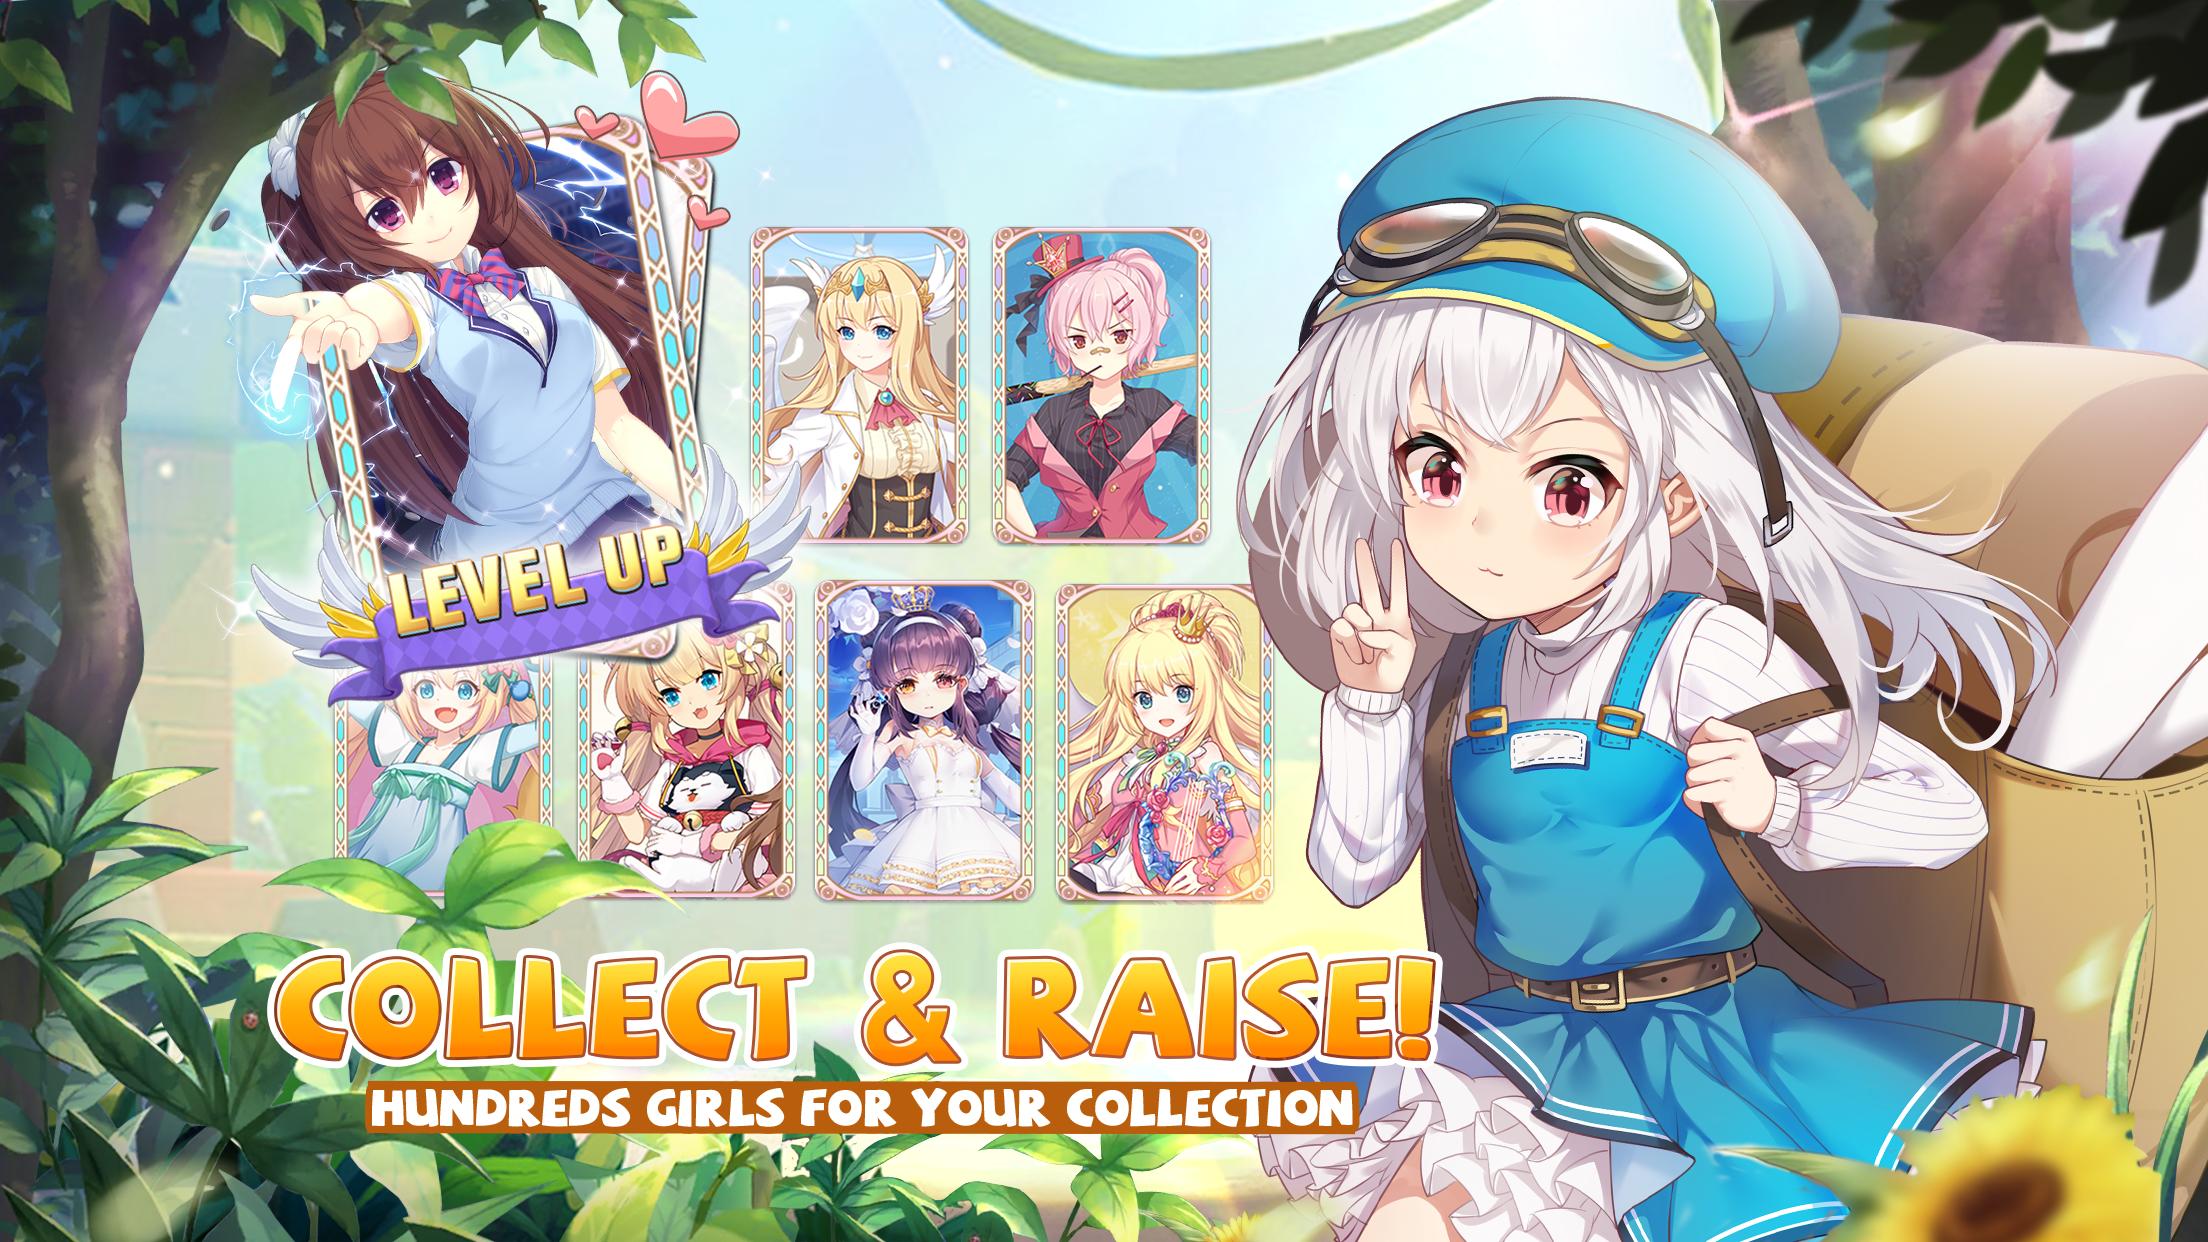 Girls X Battle 2 for Android - APK Download - 